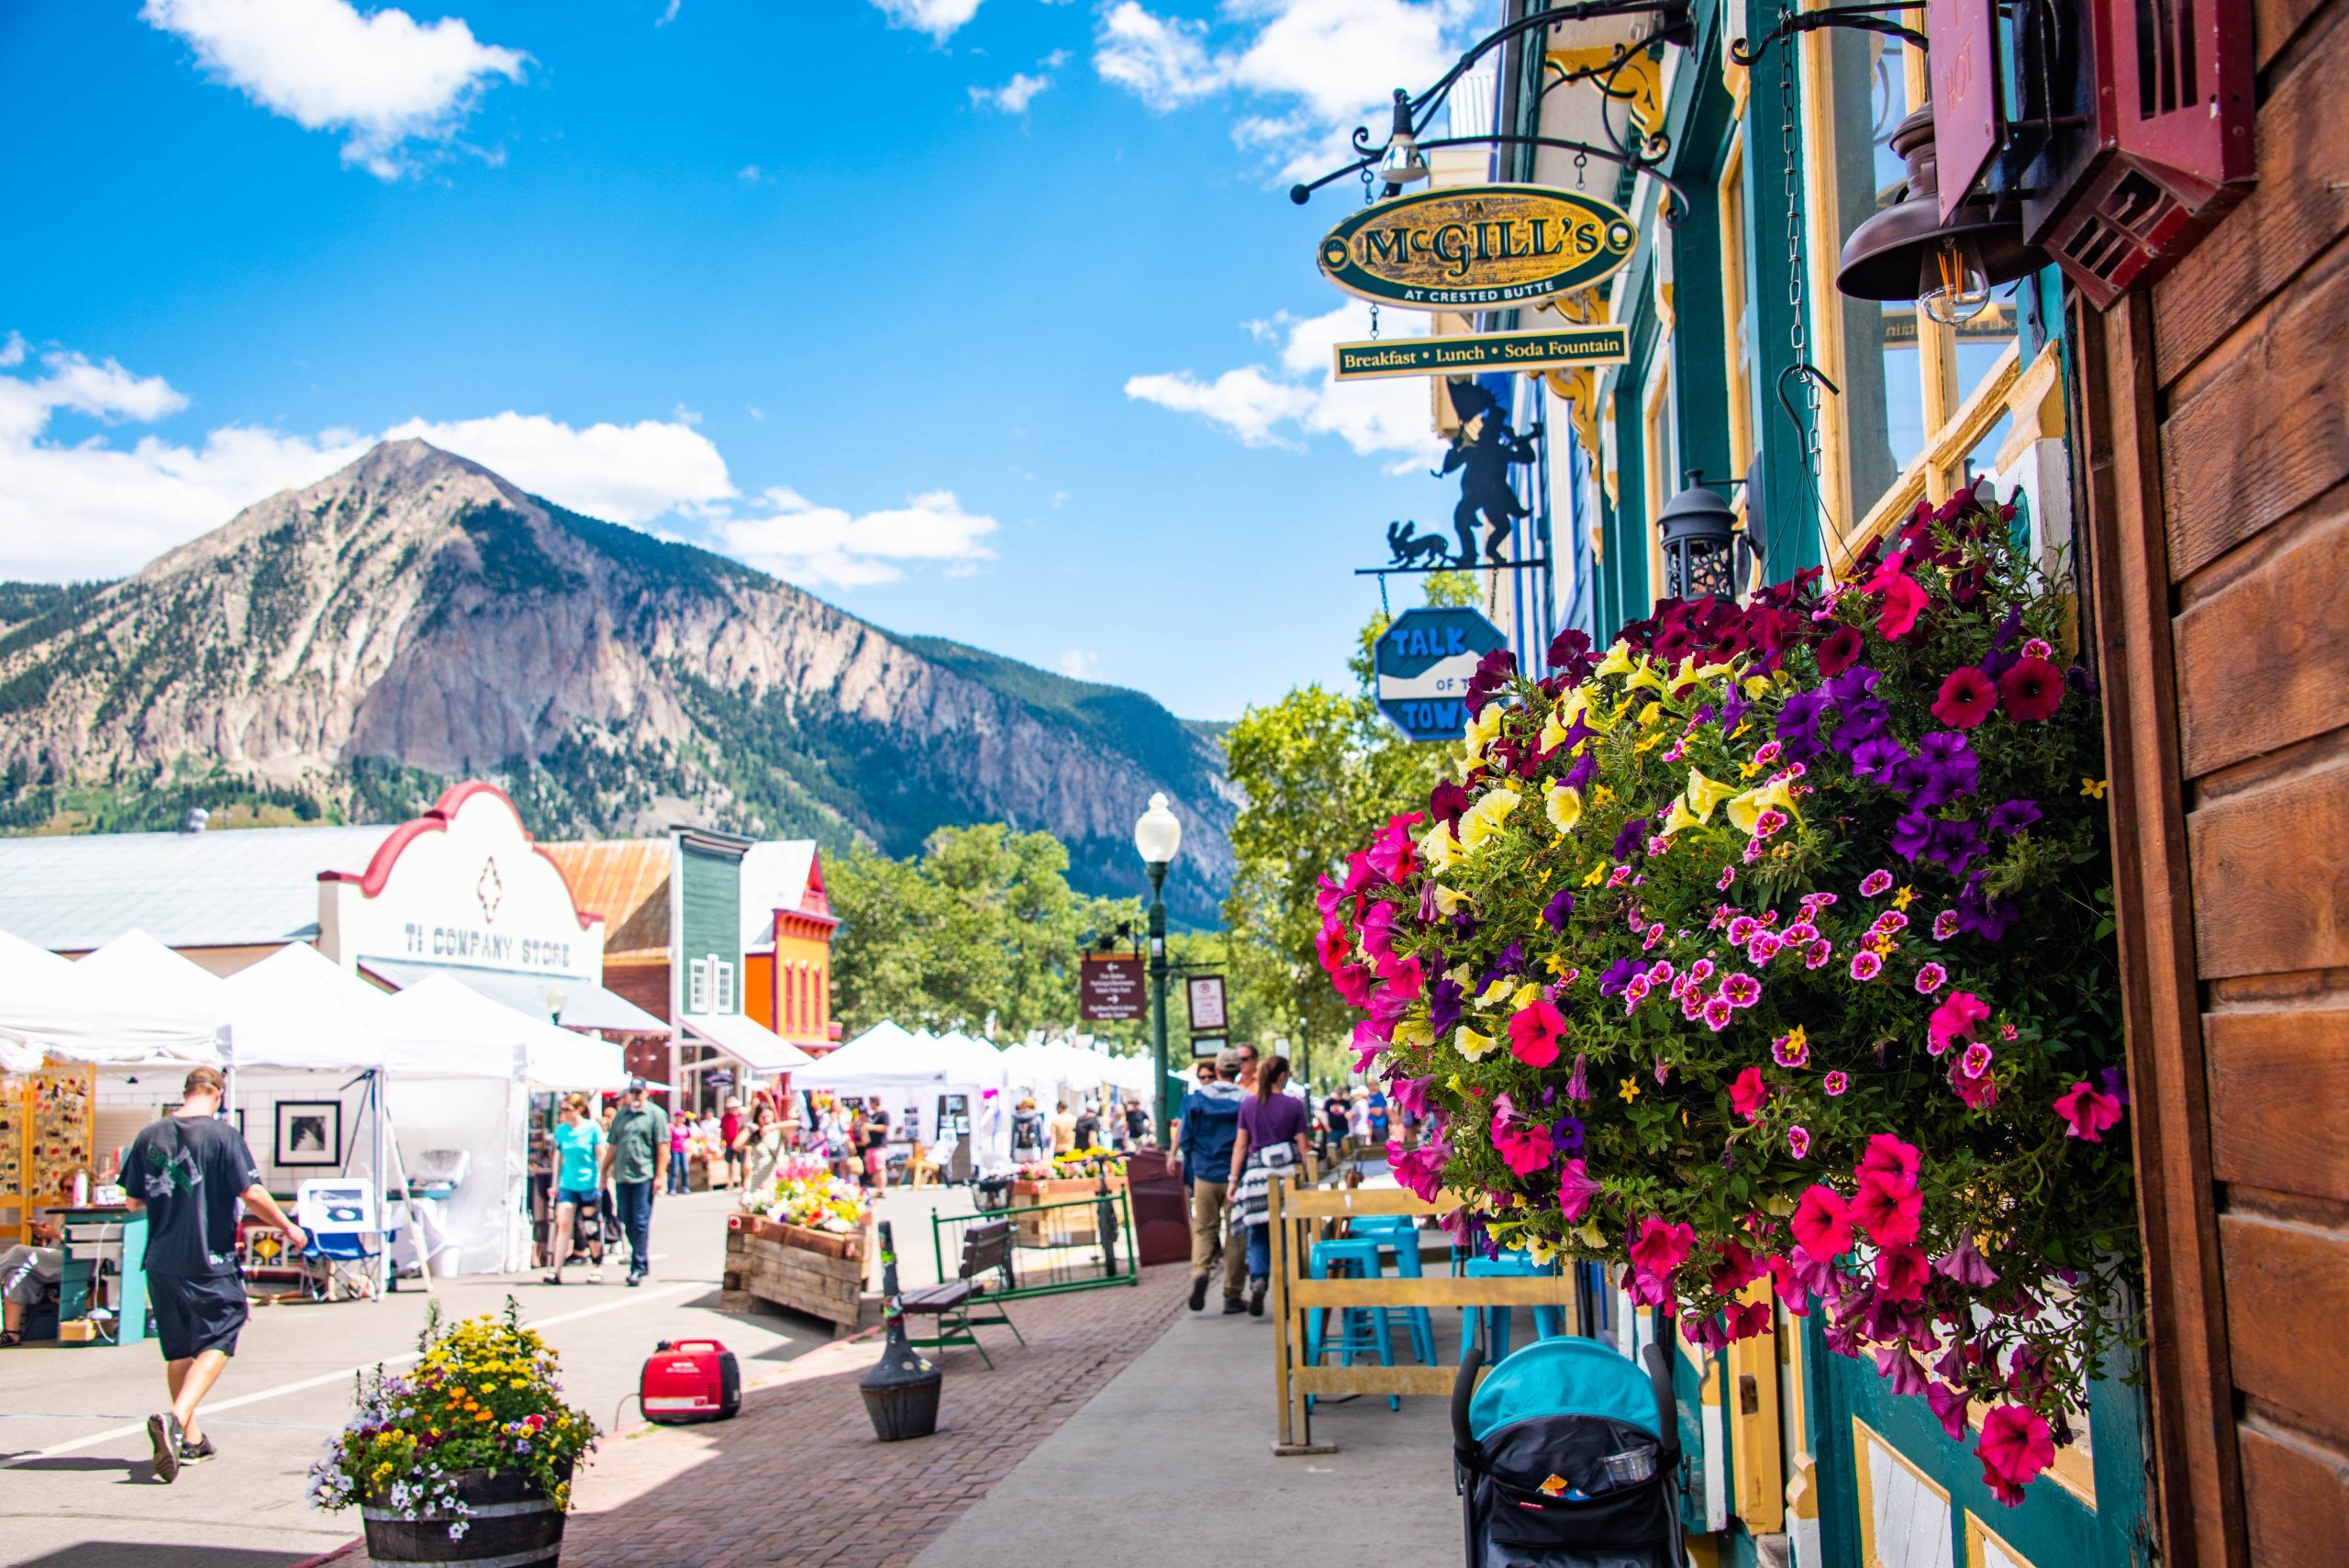 Downtown Crested Butte, Colorado on a sunny day during an event.